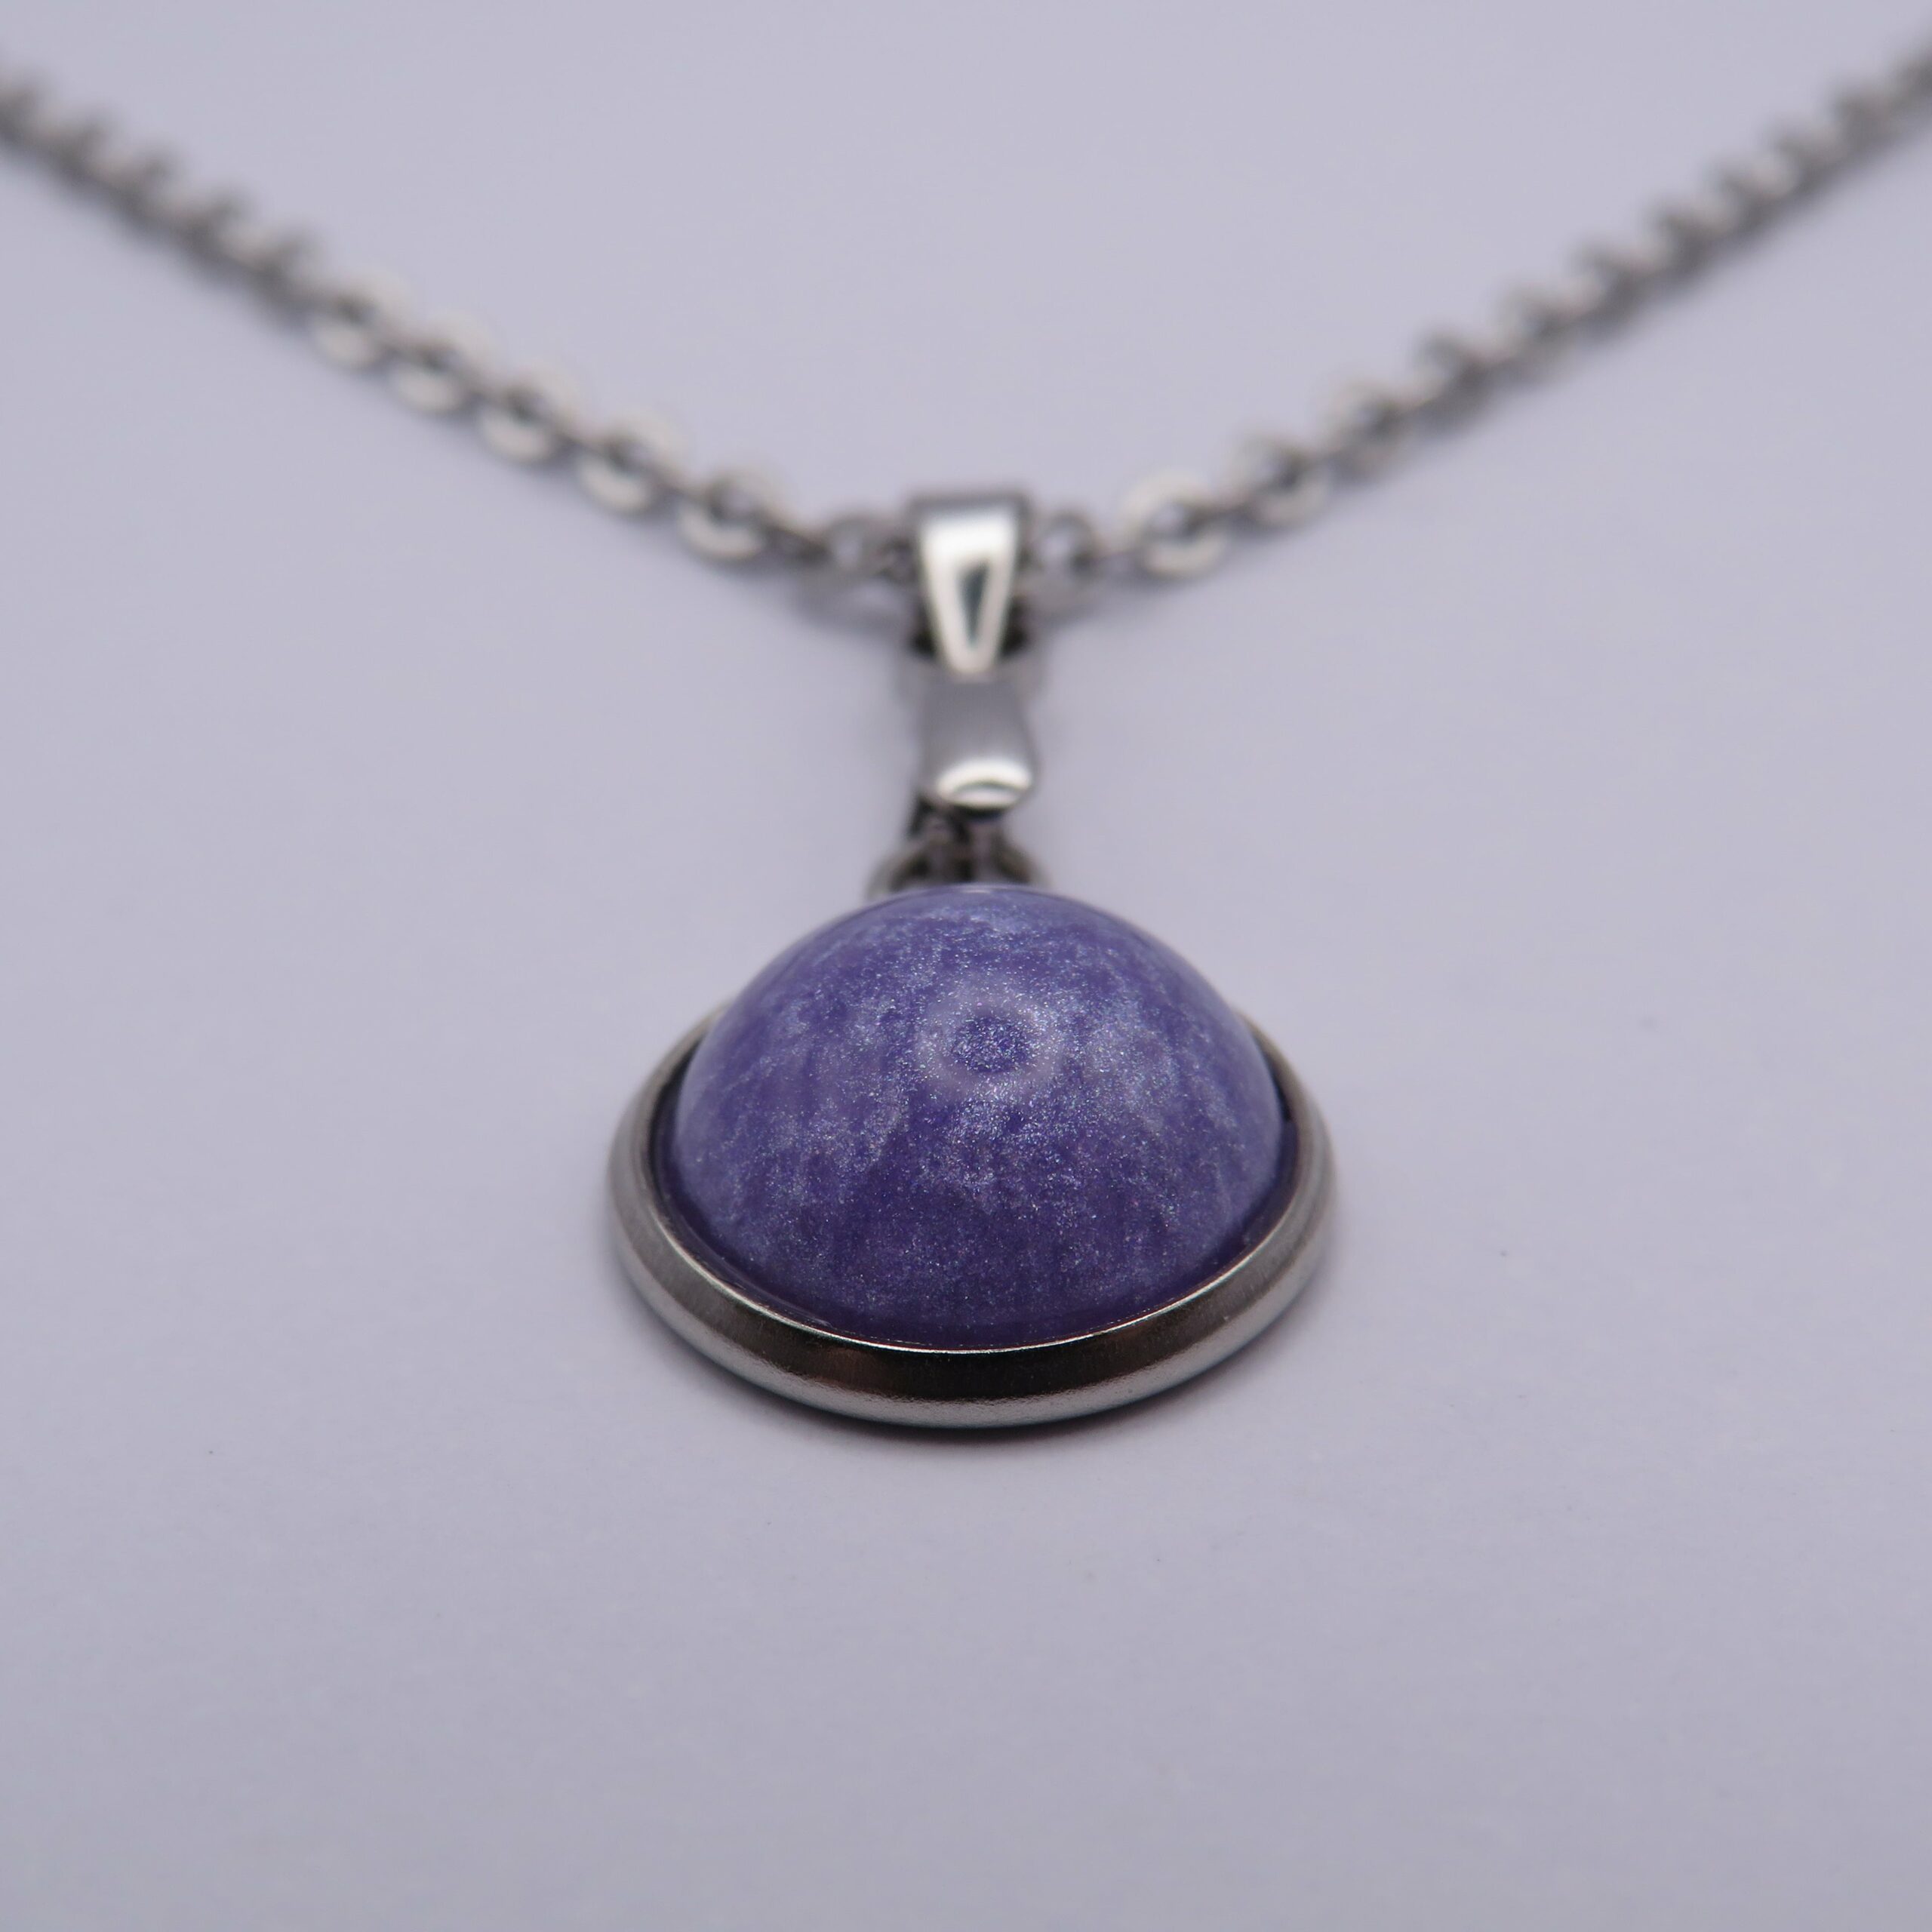 Stainless Steel Purple Cabochon Pendant Necklace